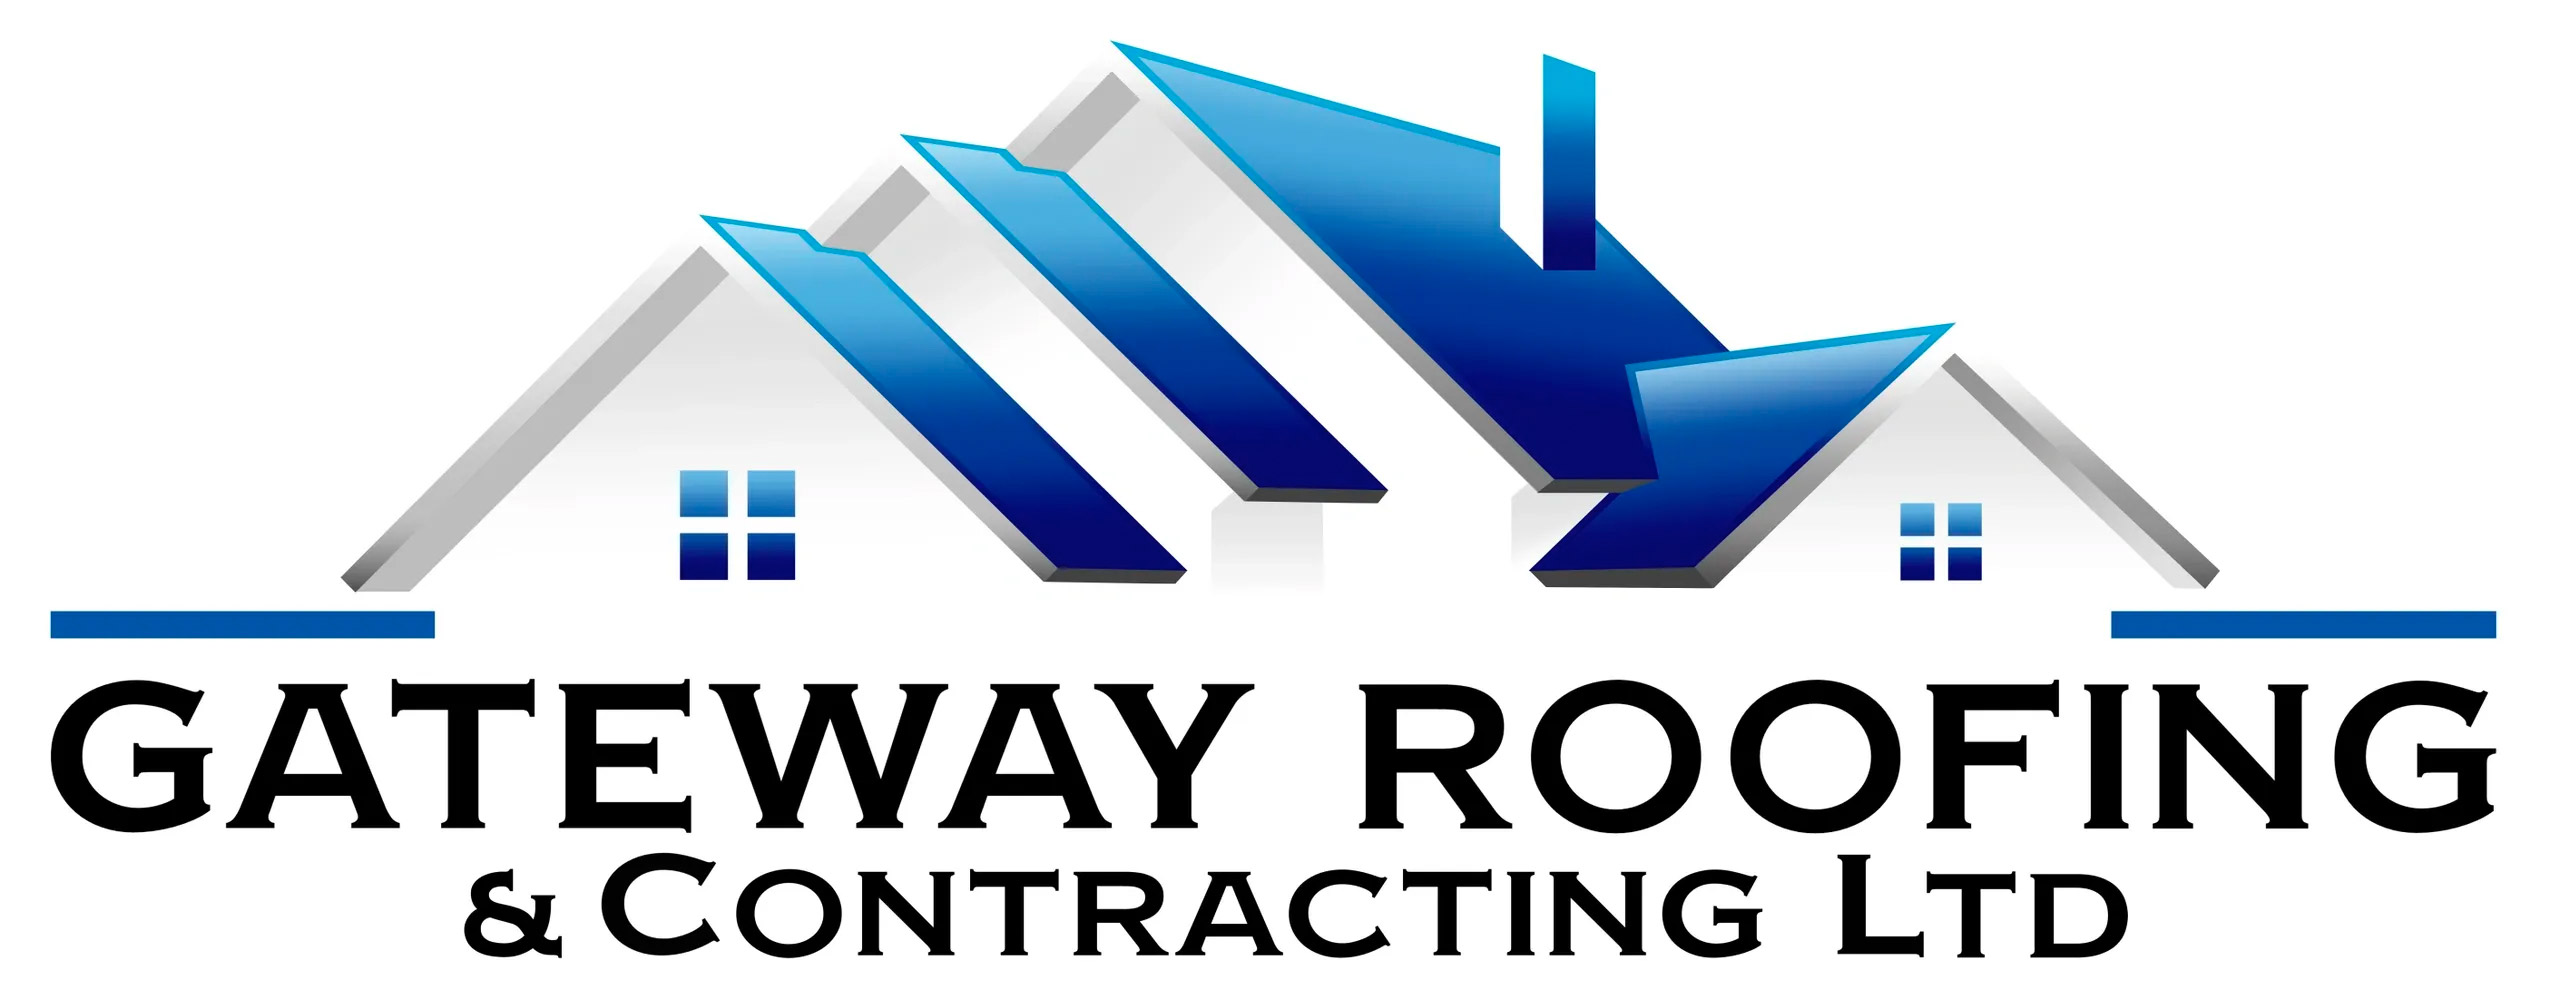 Gateway Roofing & Contracting logo